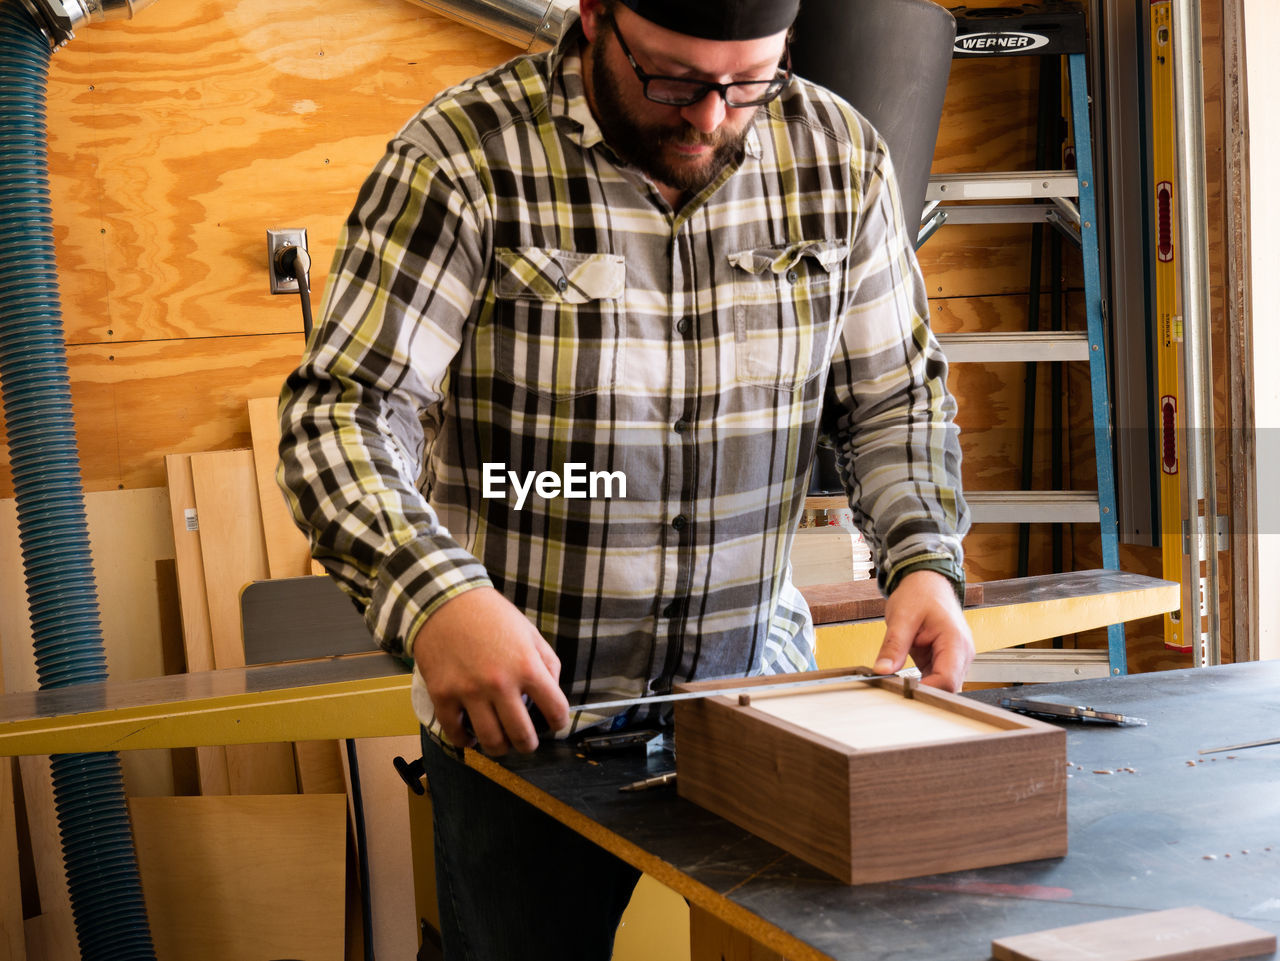 A carpenter measuring the bottom of the box he is building in his woodshop